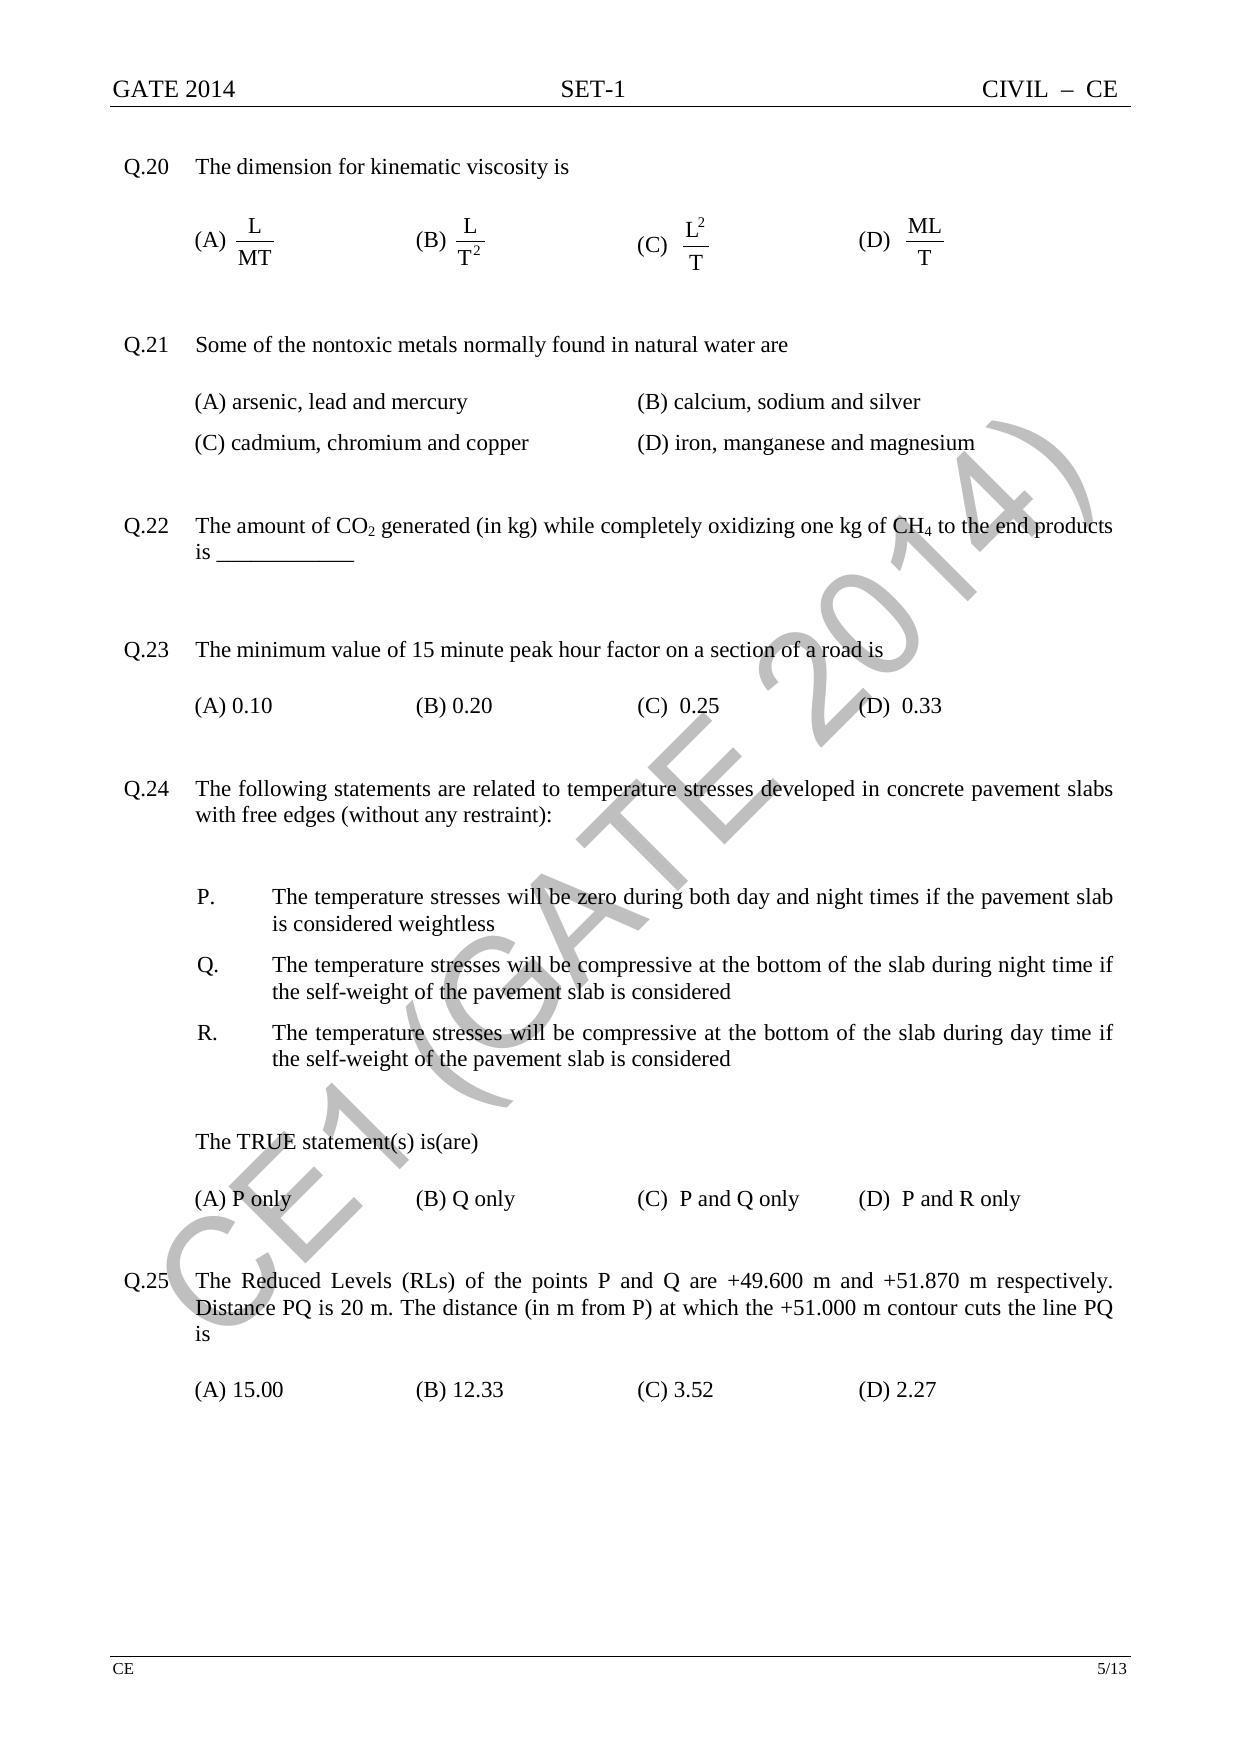 GATE 2014 Civil Engineering (CE) Question Paper with Answer Key - Page 12